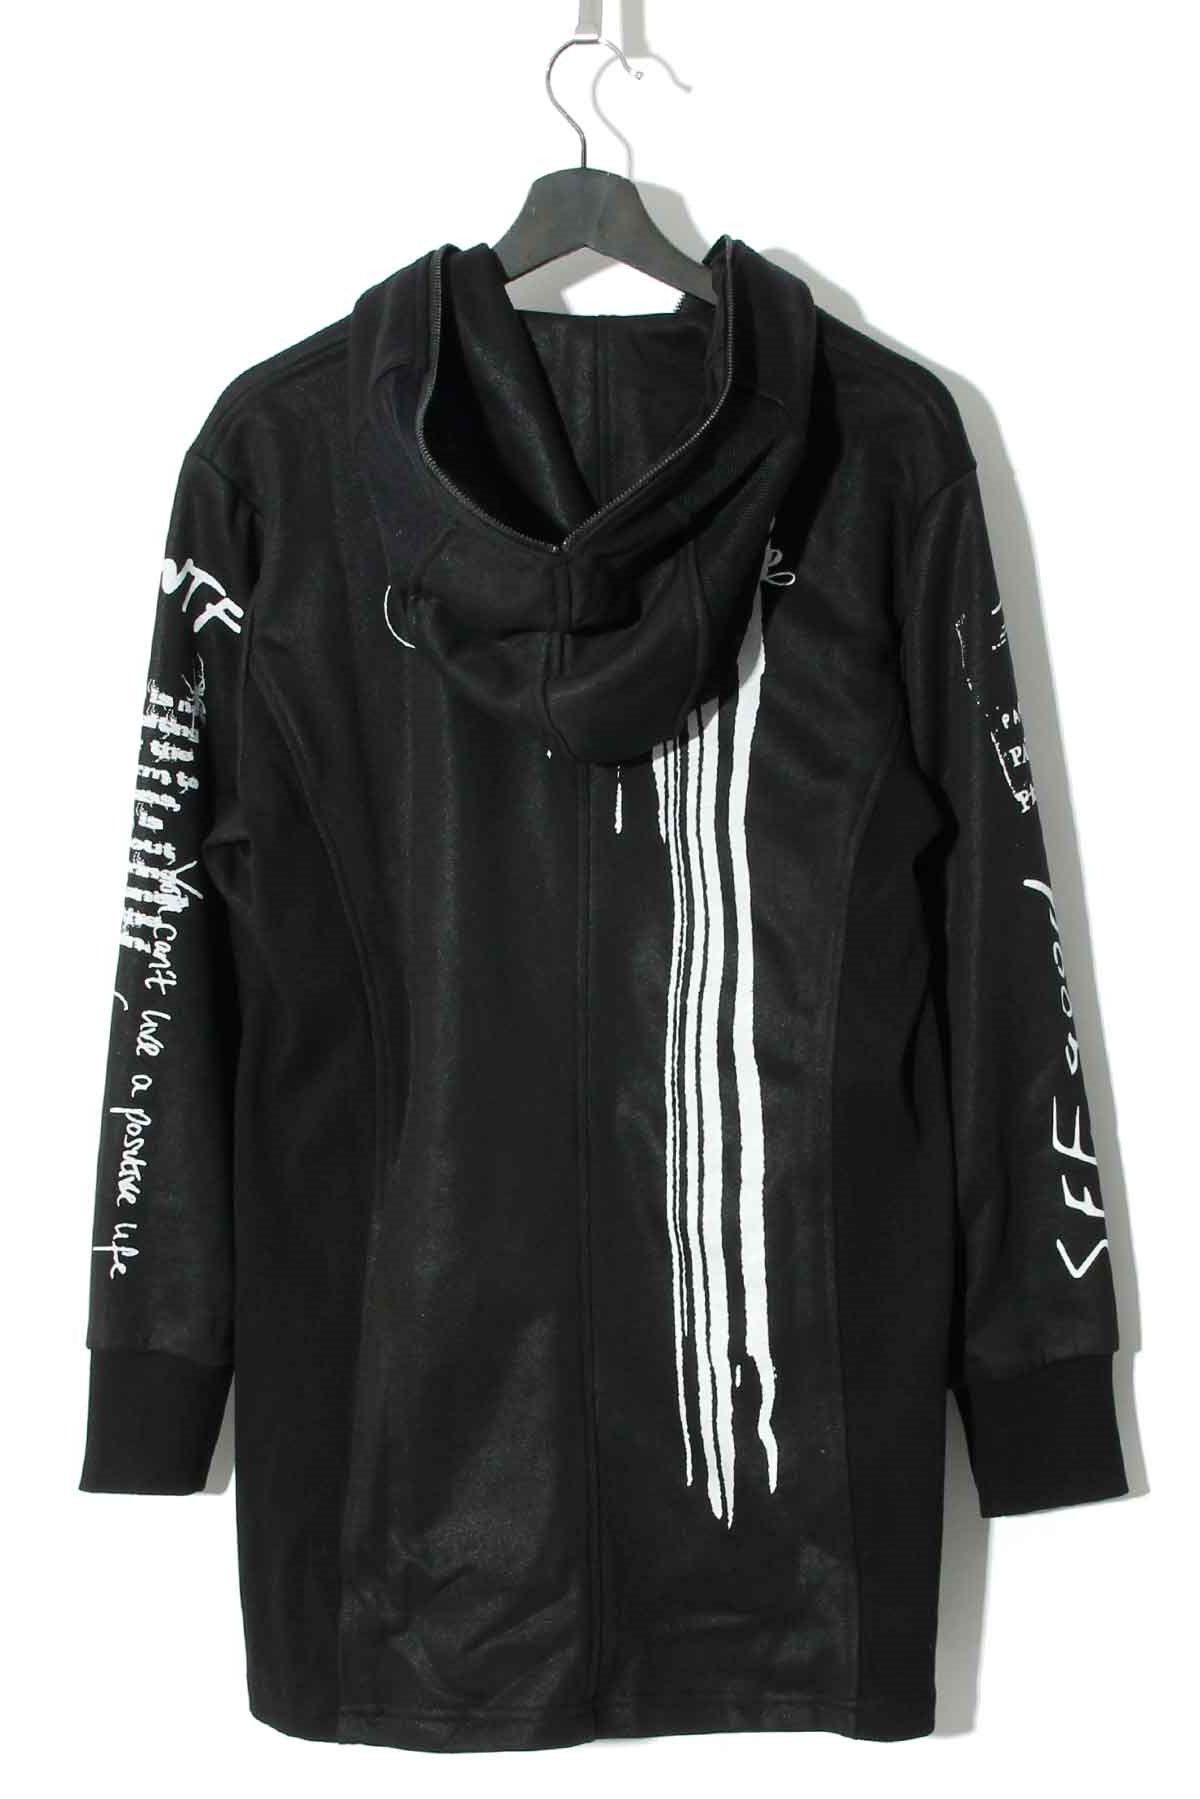 SWITCHBLADE - GRAPHICS LONG PARKA / BLACK 【SWITCH